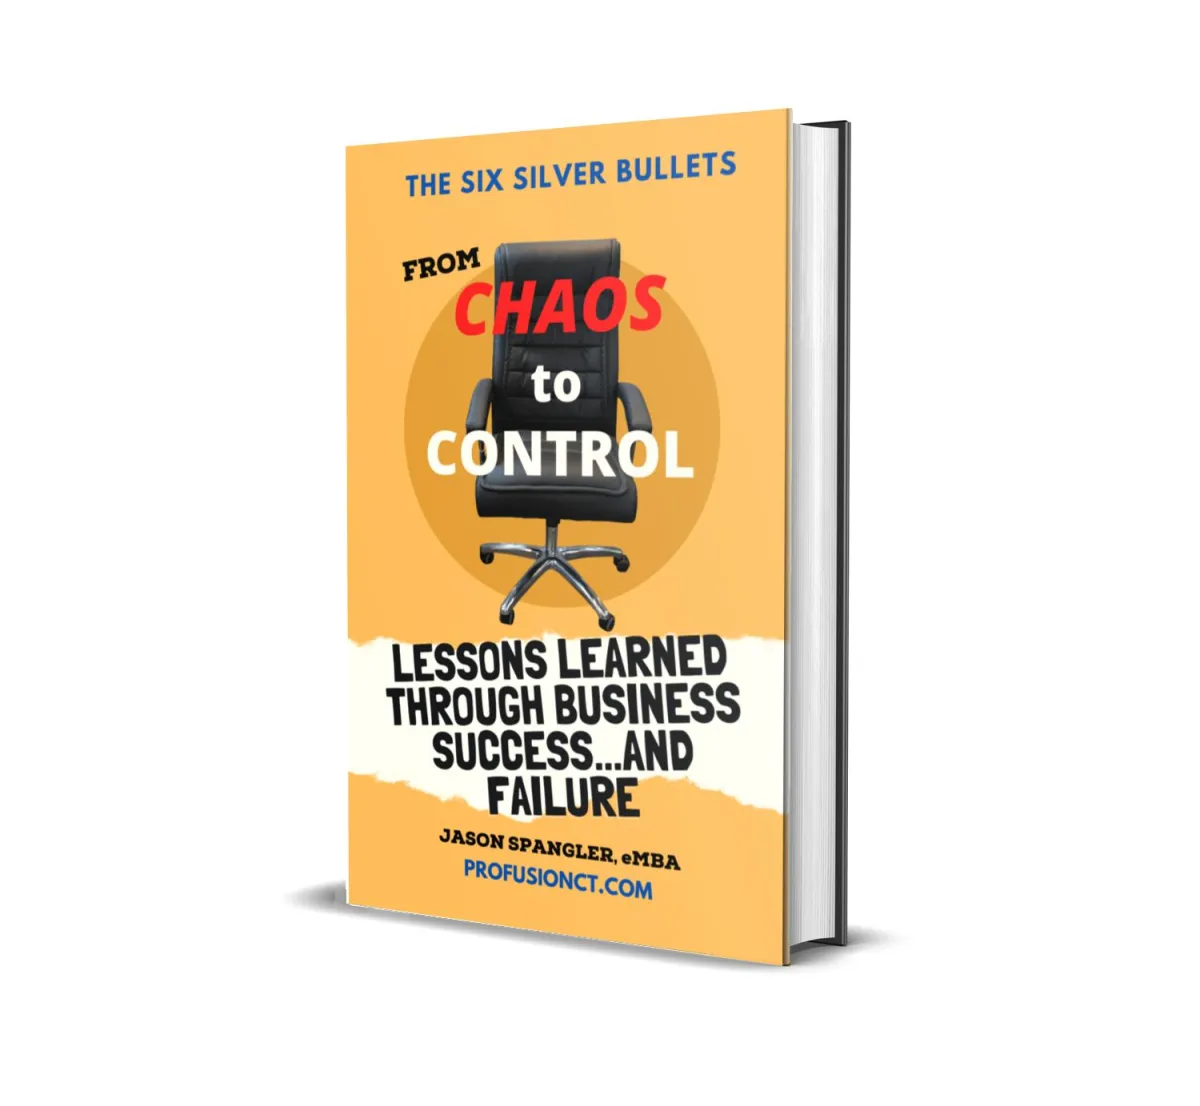 Business coach provides free ebook to learn from my mistakes and get control of the chaos.